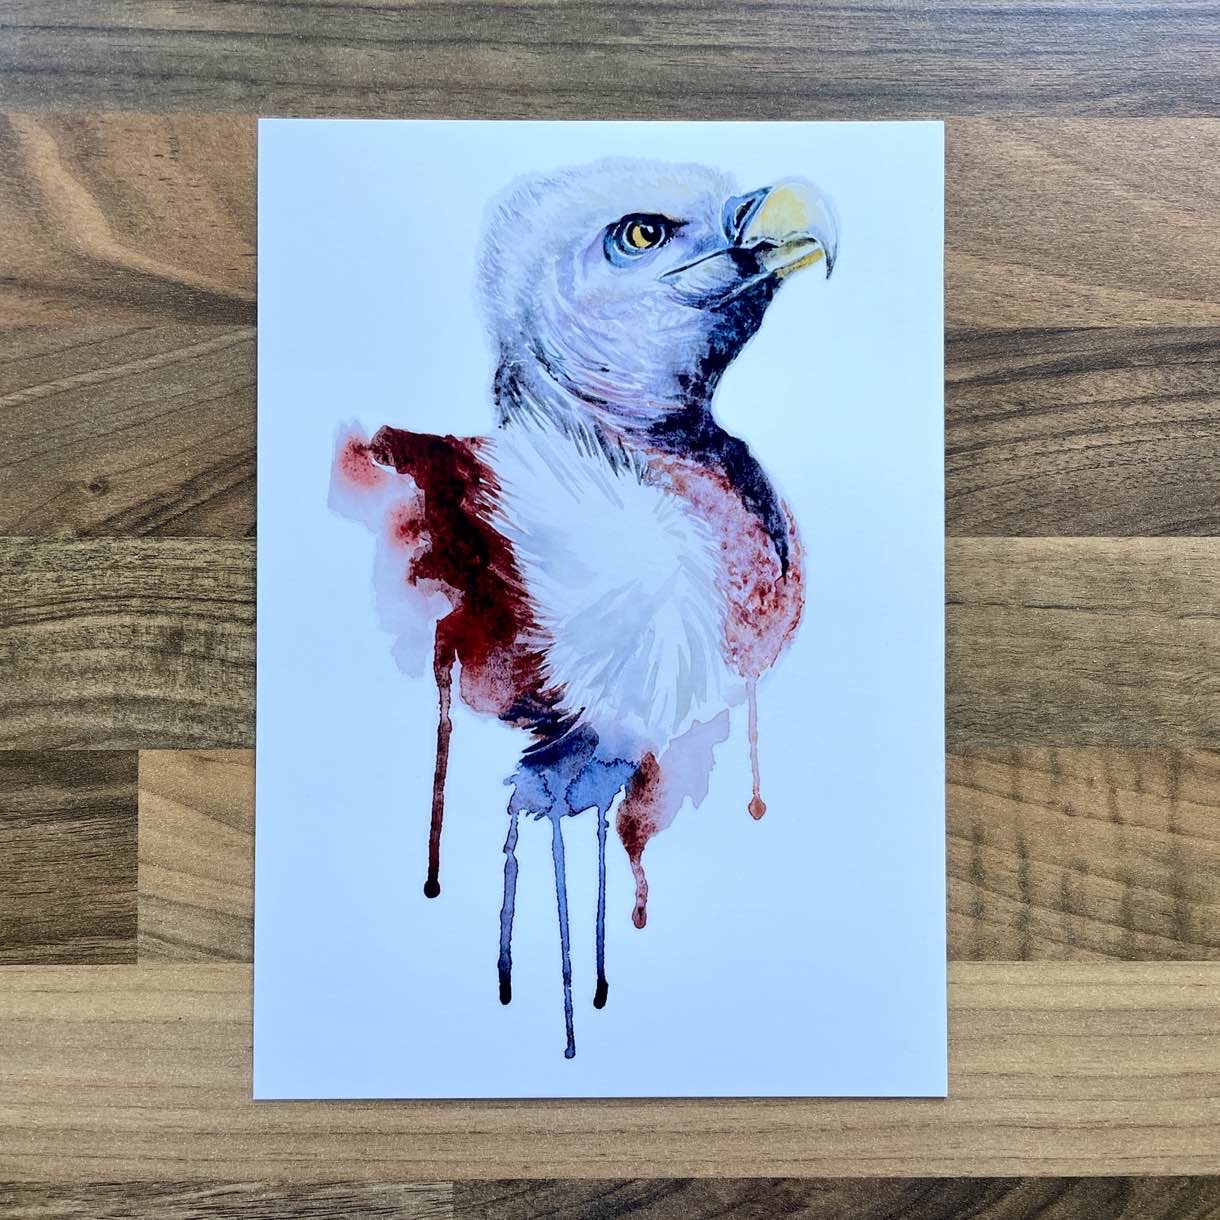 Watercolour painting of an American eagle's head with paint drip effect